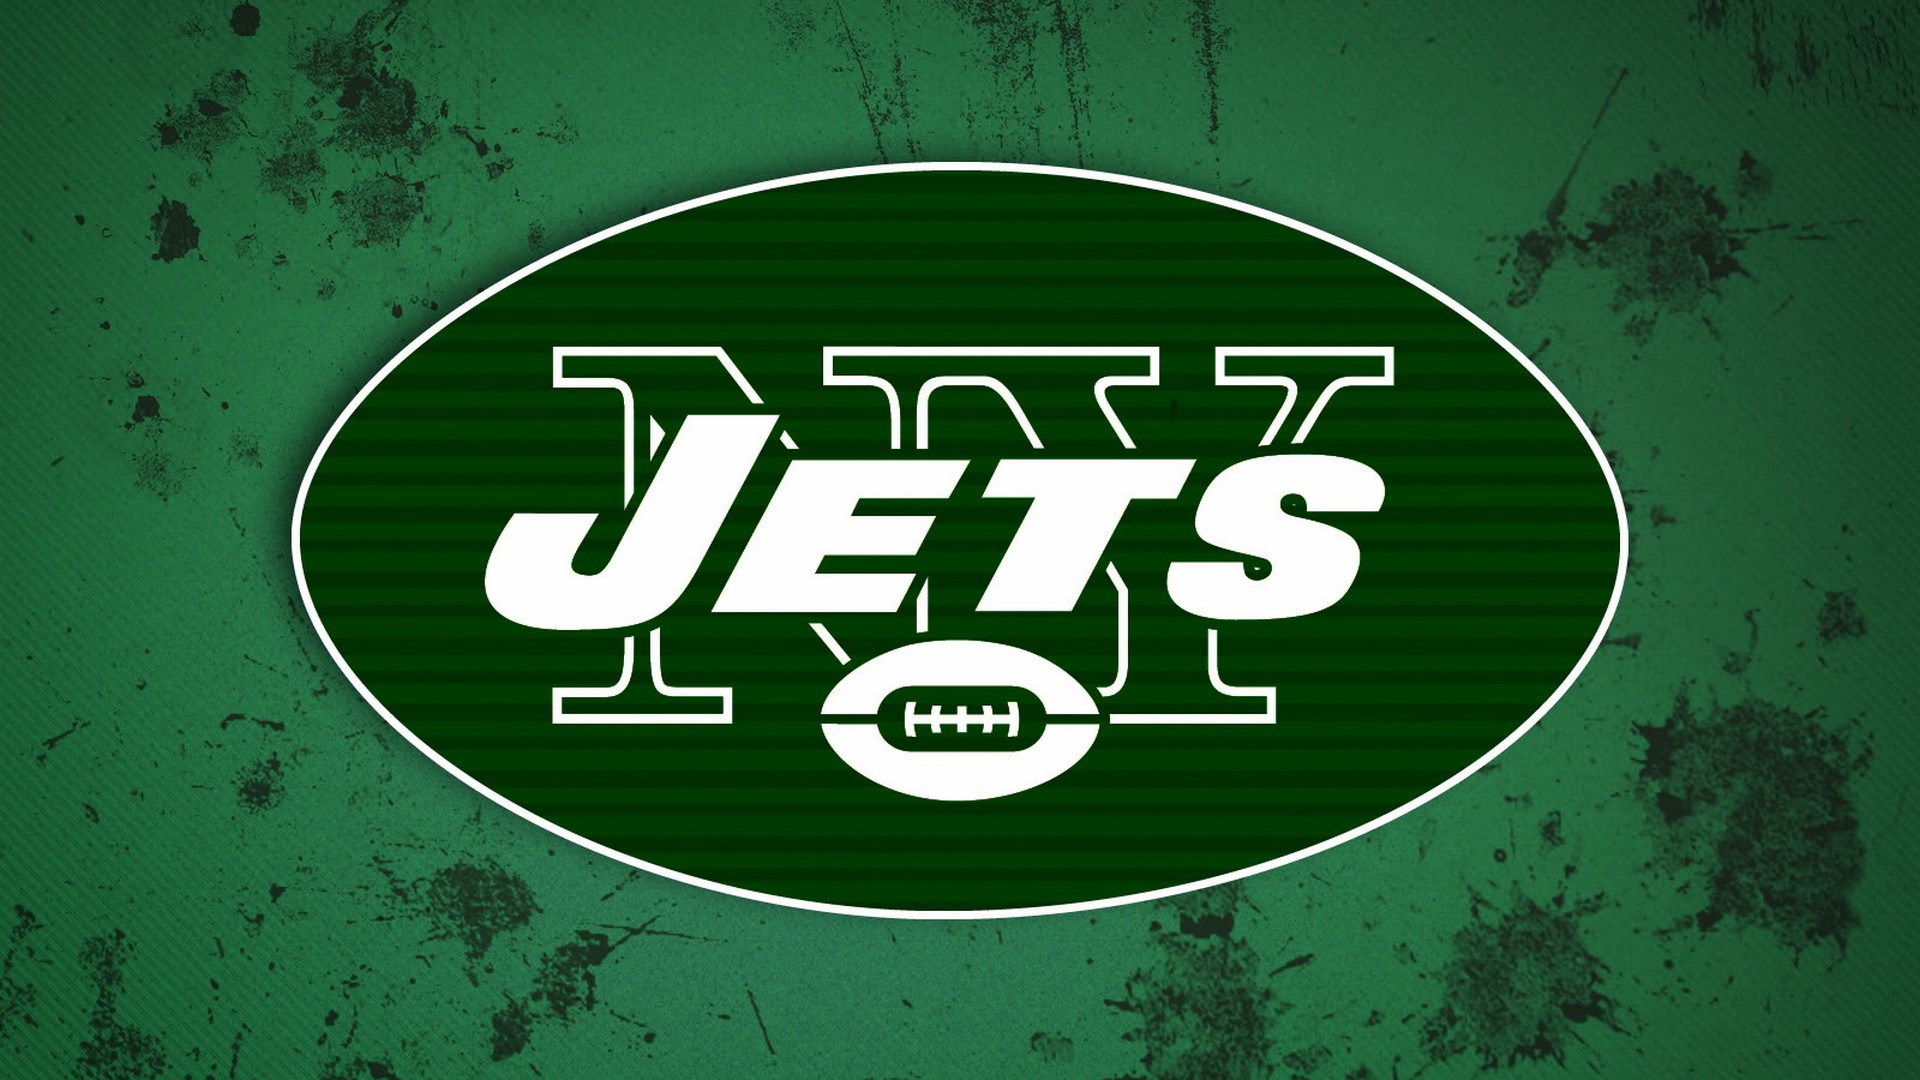 New York Jets Wallpaper With Resolution Pixel - New York Jets - HD Wallpaper 